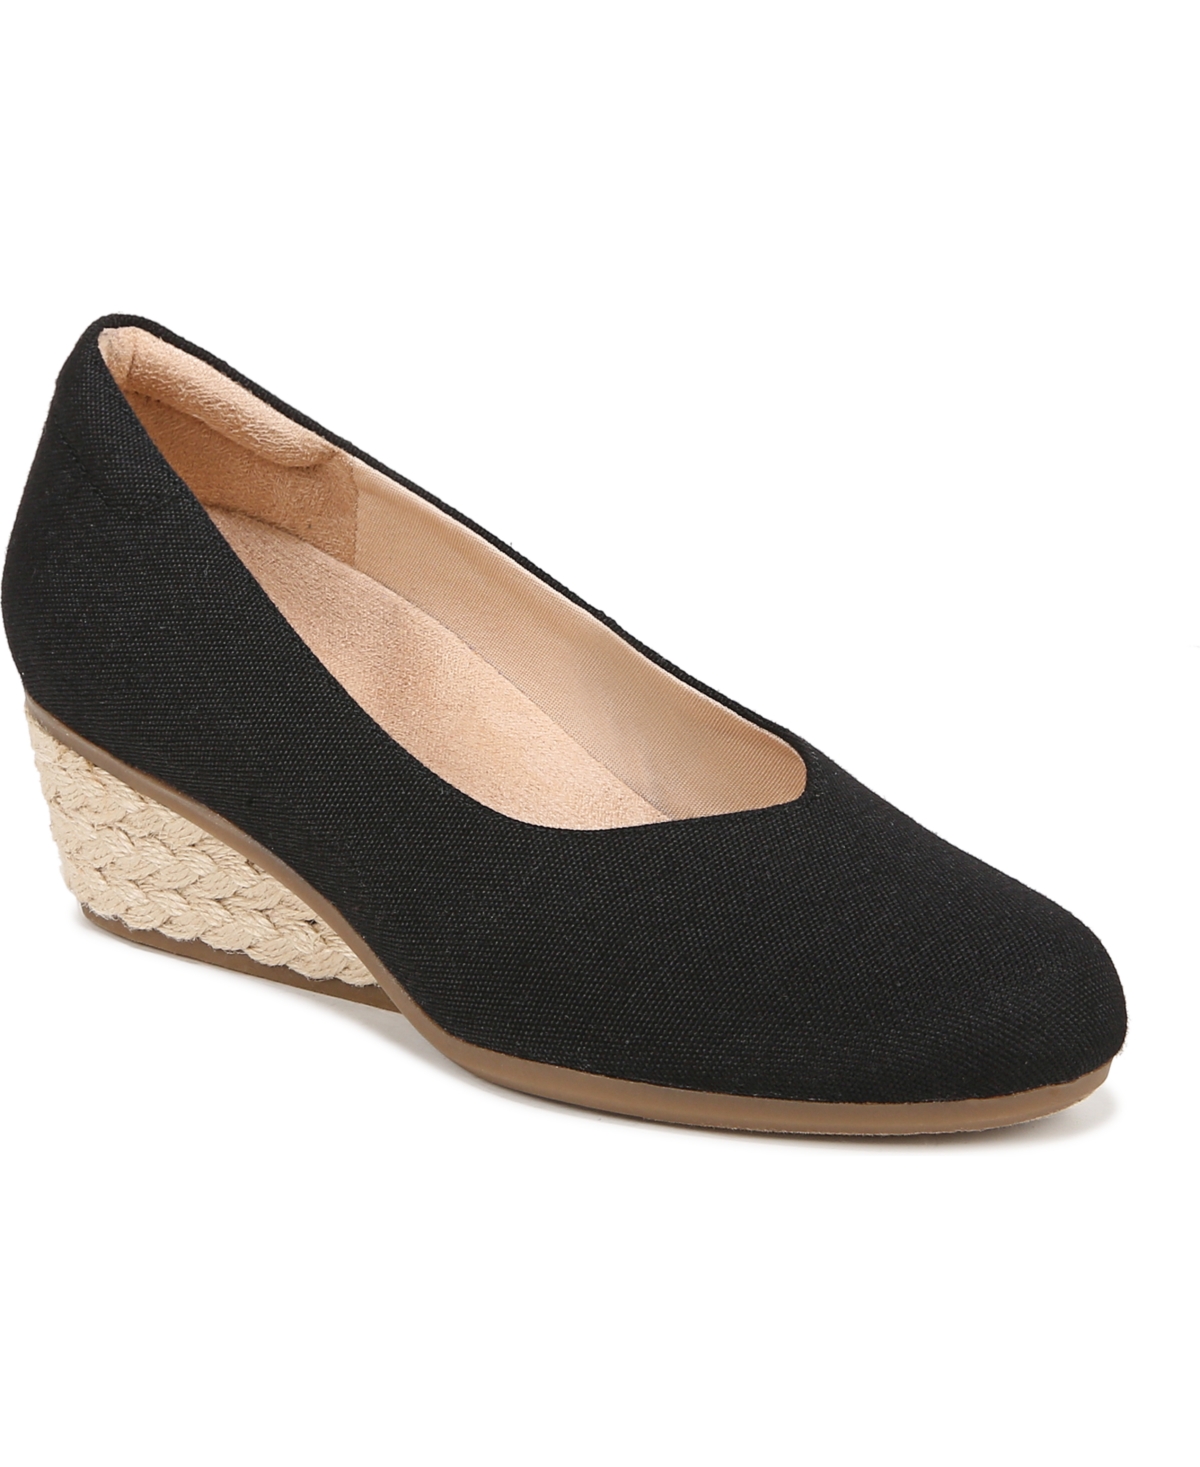 Women's Be Ready Wedge Pumps - Black Fabric